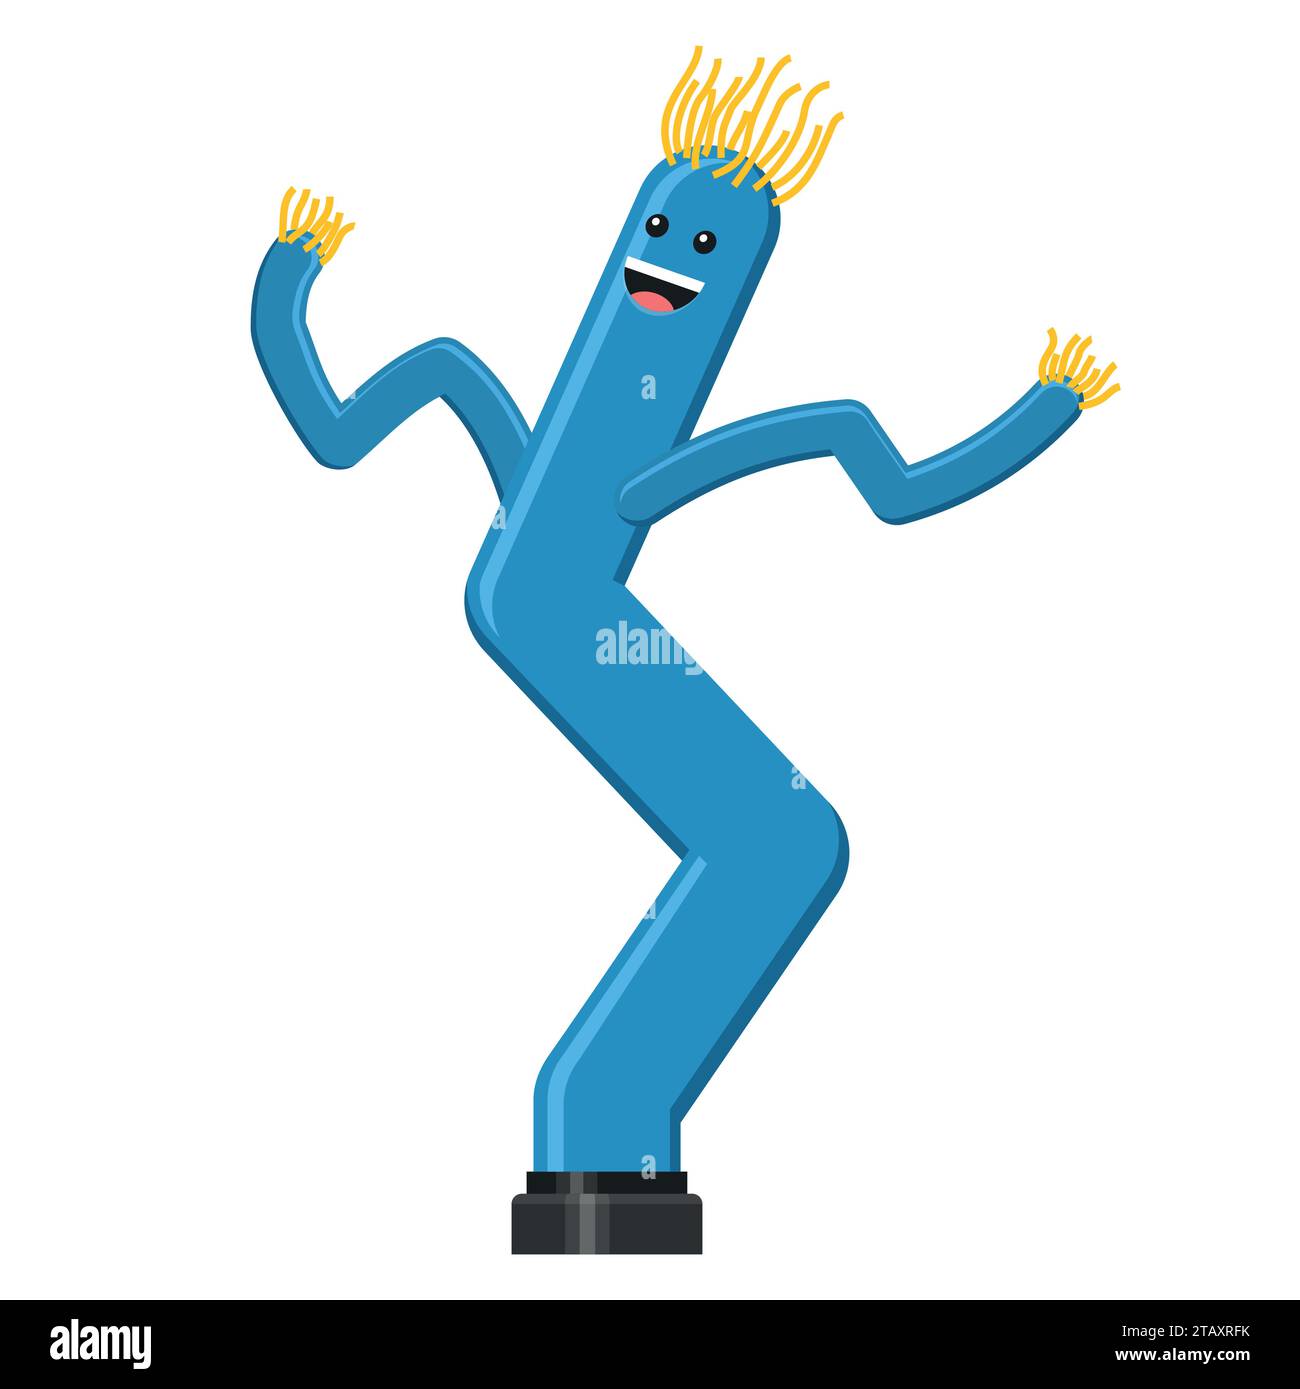 Dancing inflatable blue tube man in flat style isolated on white background. Wacky waving air hand for sales and advertising. Vector illustration Stock Vector